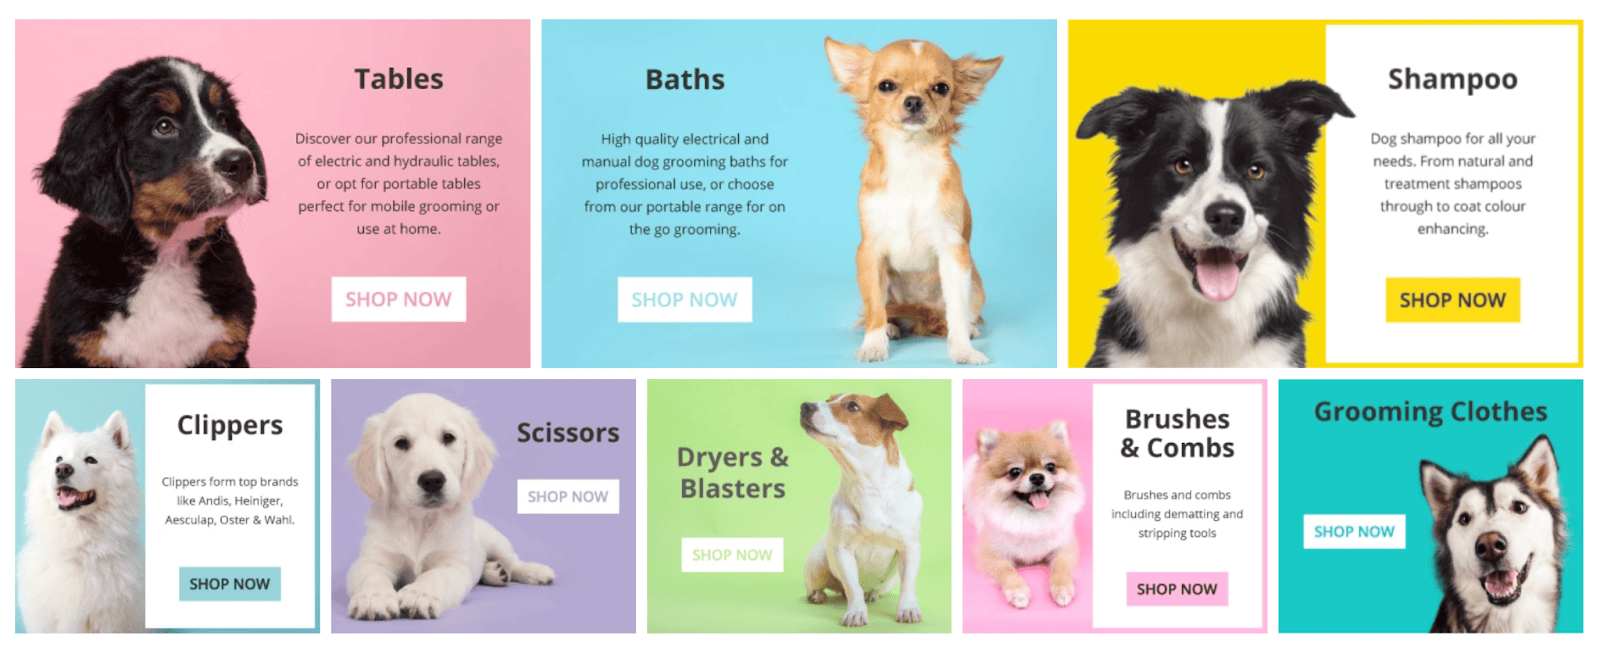 Groomers-online.com Review